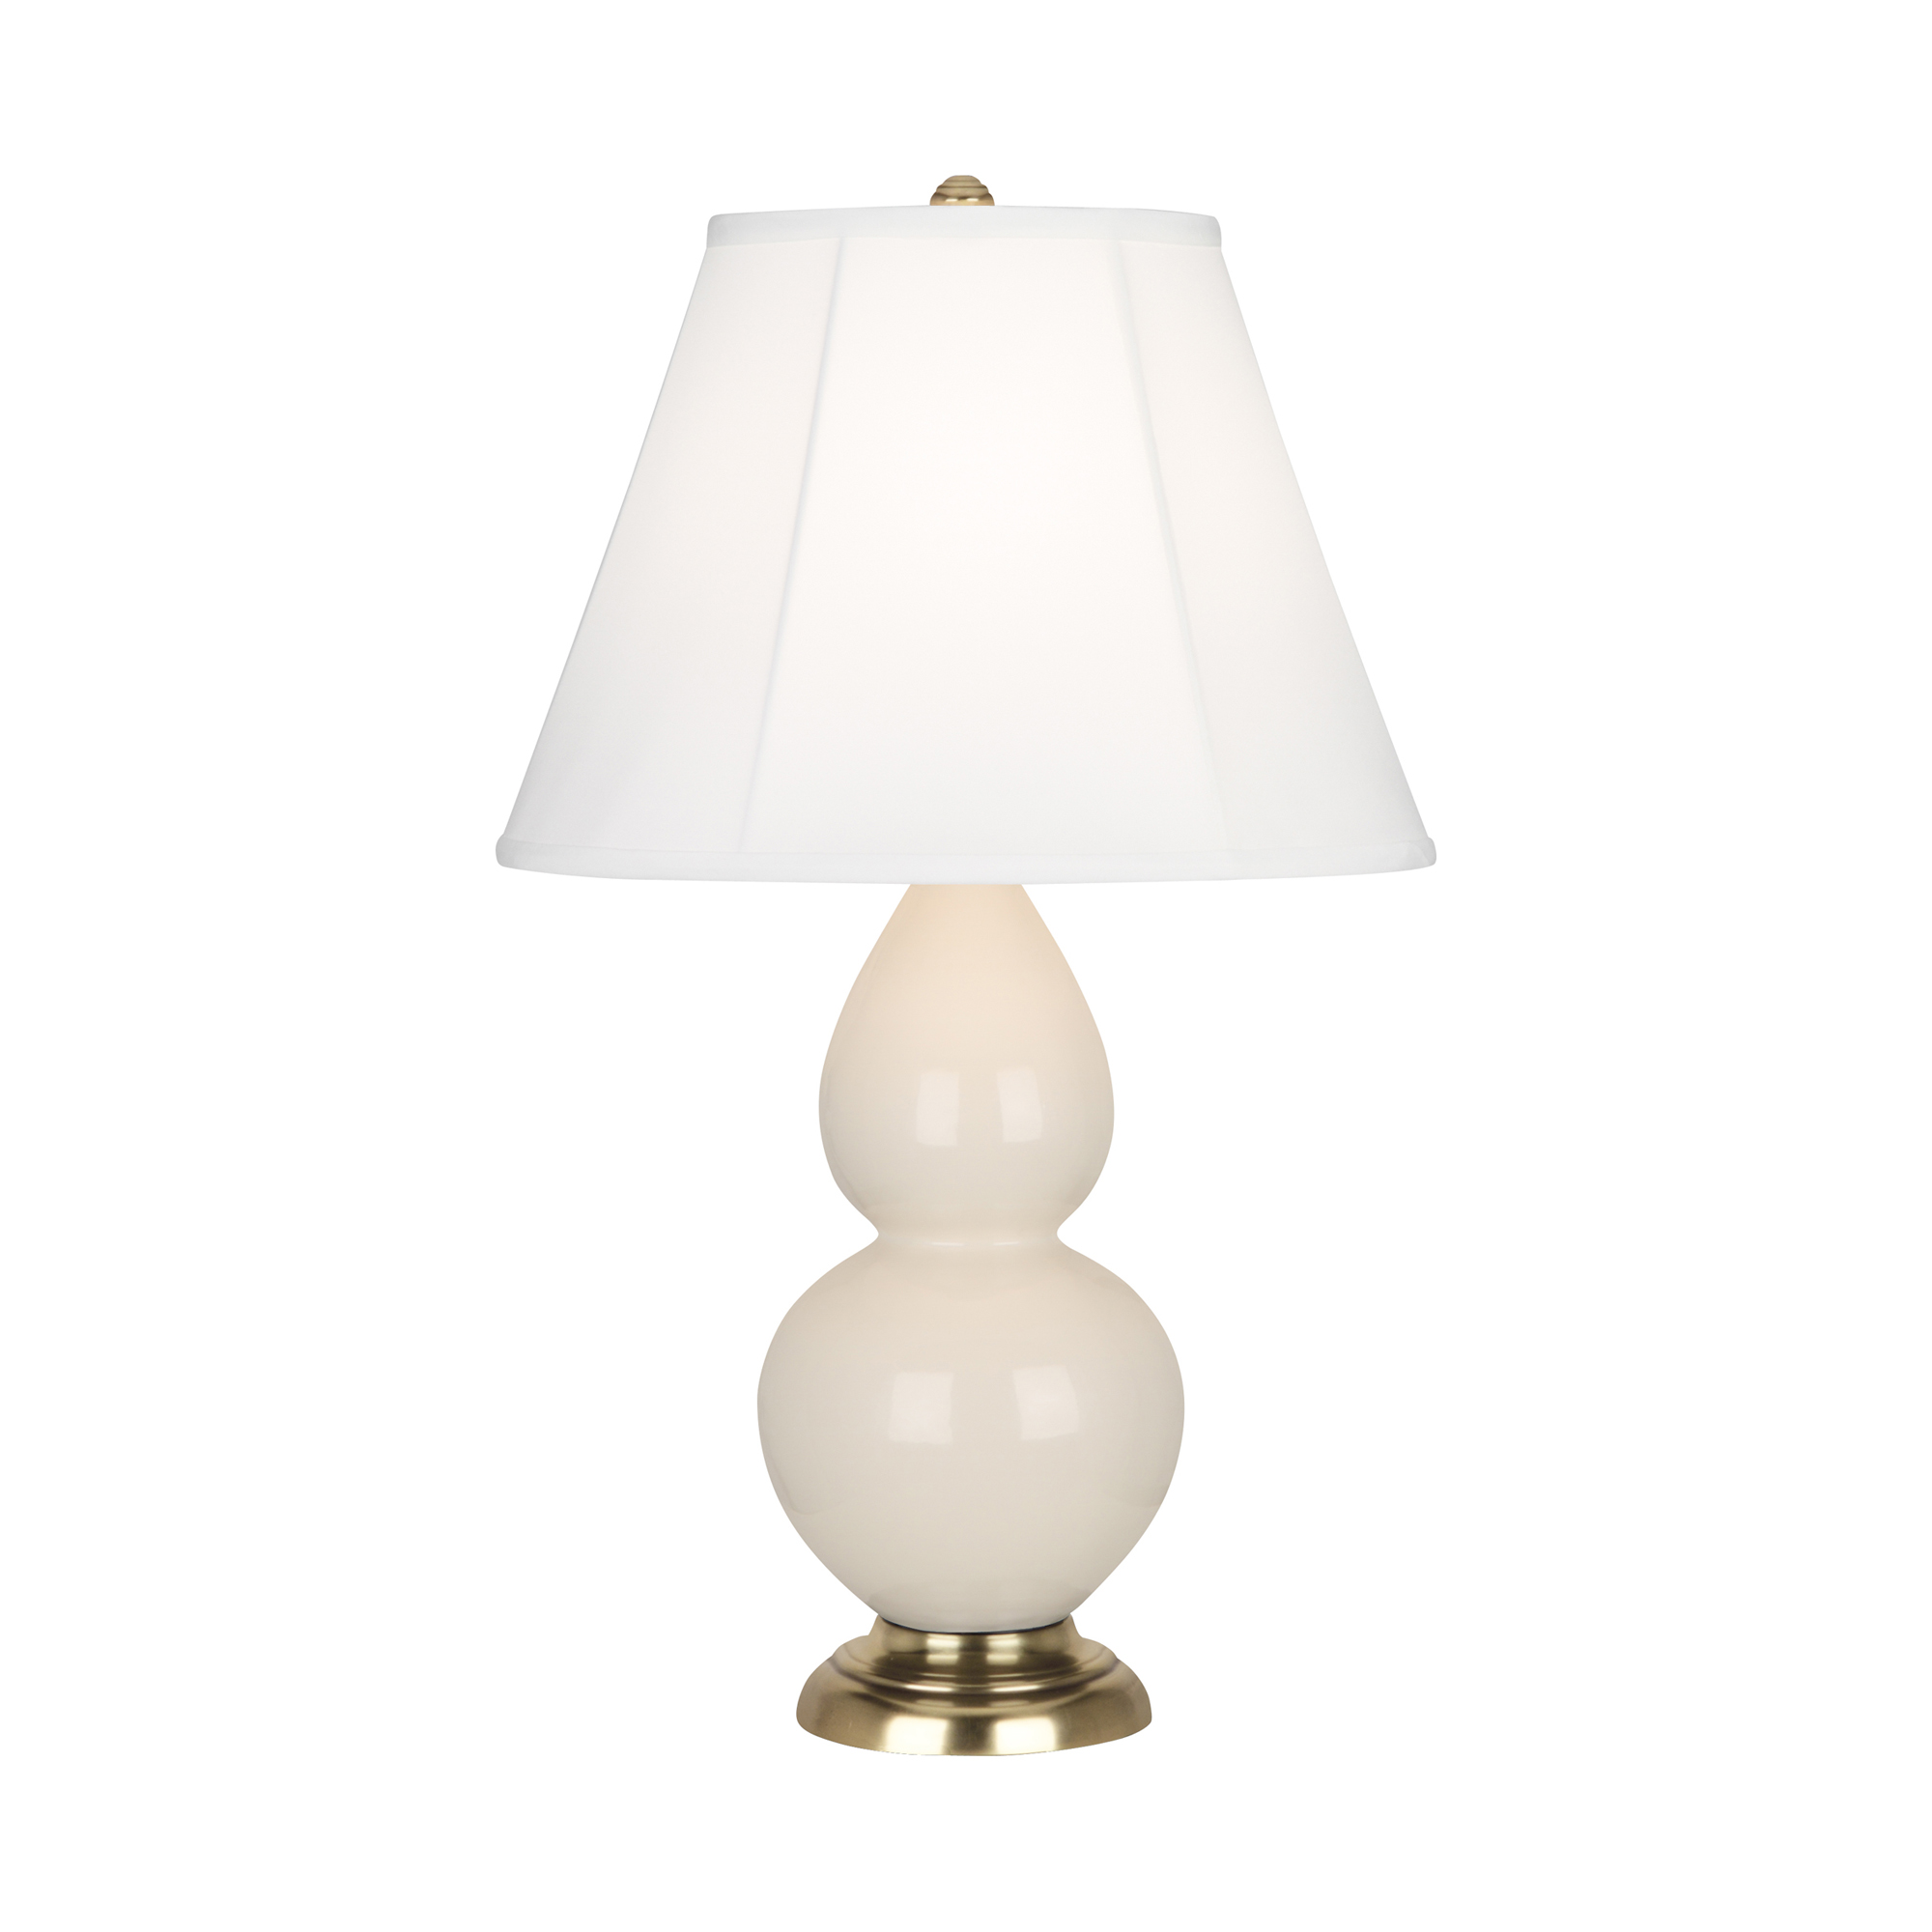 Small Double Gourd Accent Lamp Style #1774